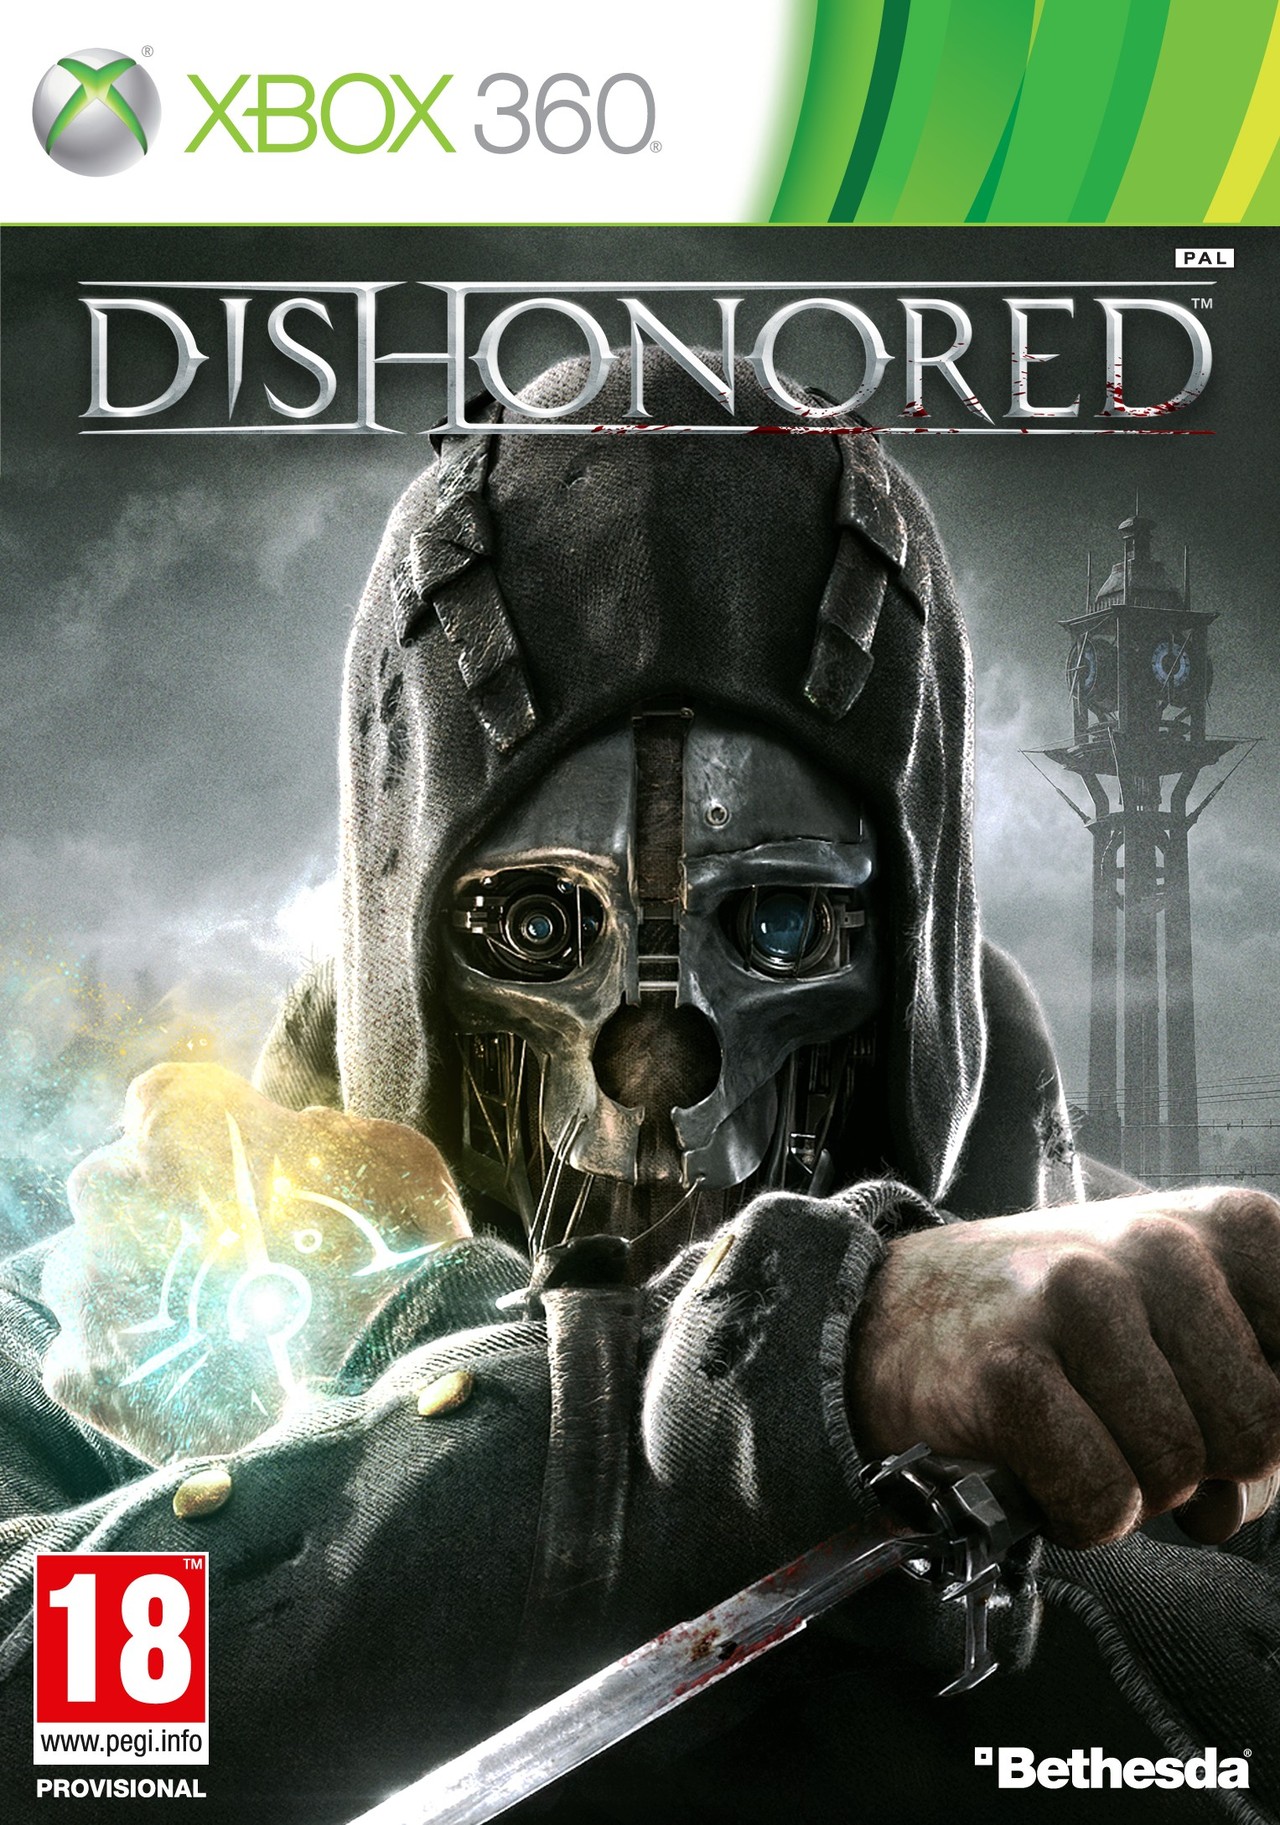 http://image.jeuxvideo.com/images/jaquettes/00041410/jaquette-dishonored-xbox-360-cover-avant-g-1336660382.jpg